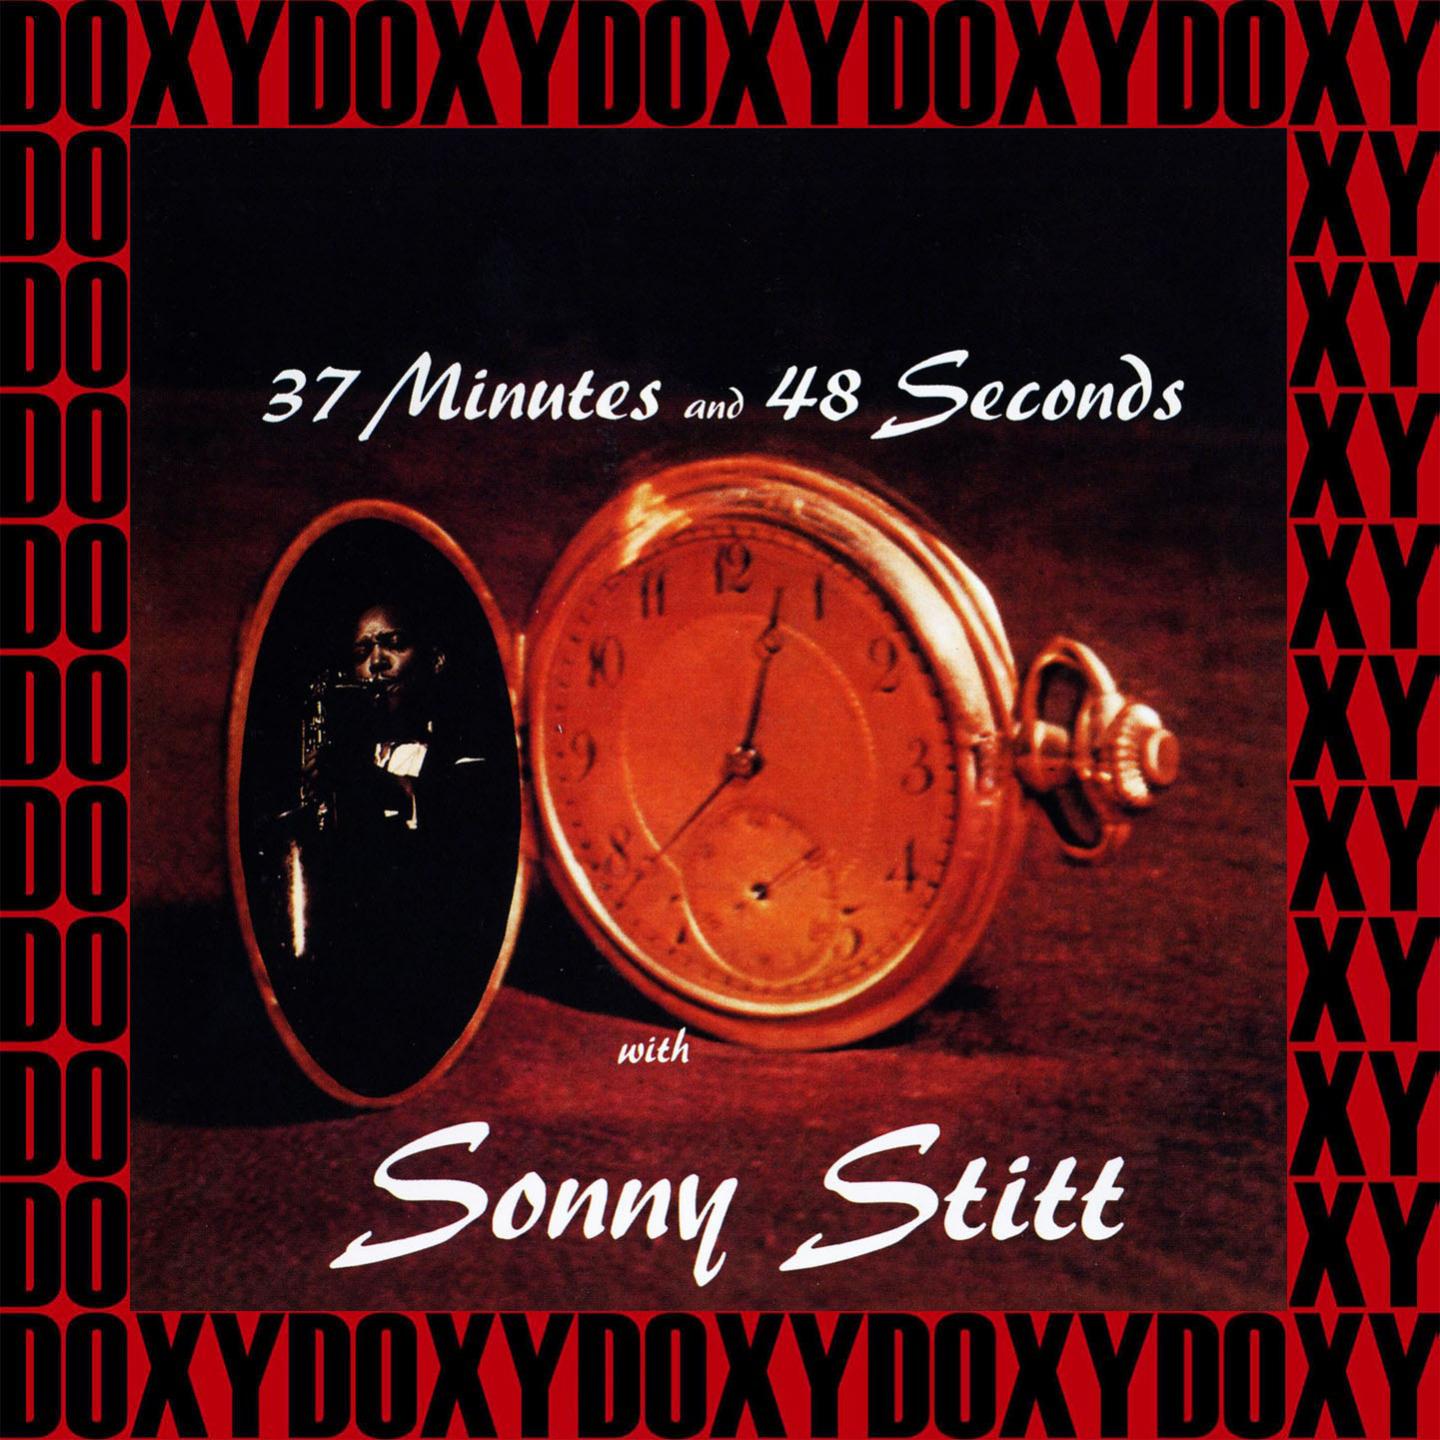 37 Minutes and 48 Seconds with Sonny Stitt (Remastered Version) (Doxy Collection)